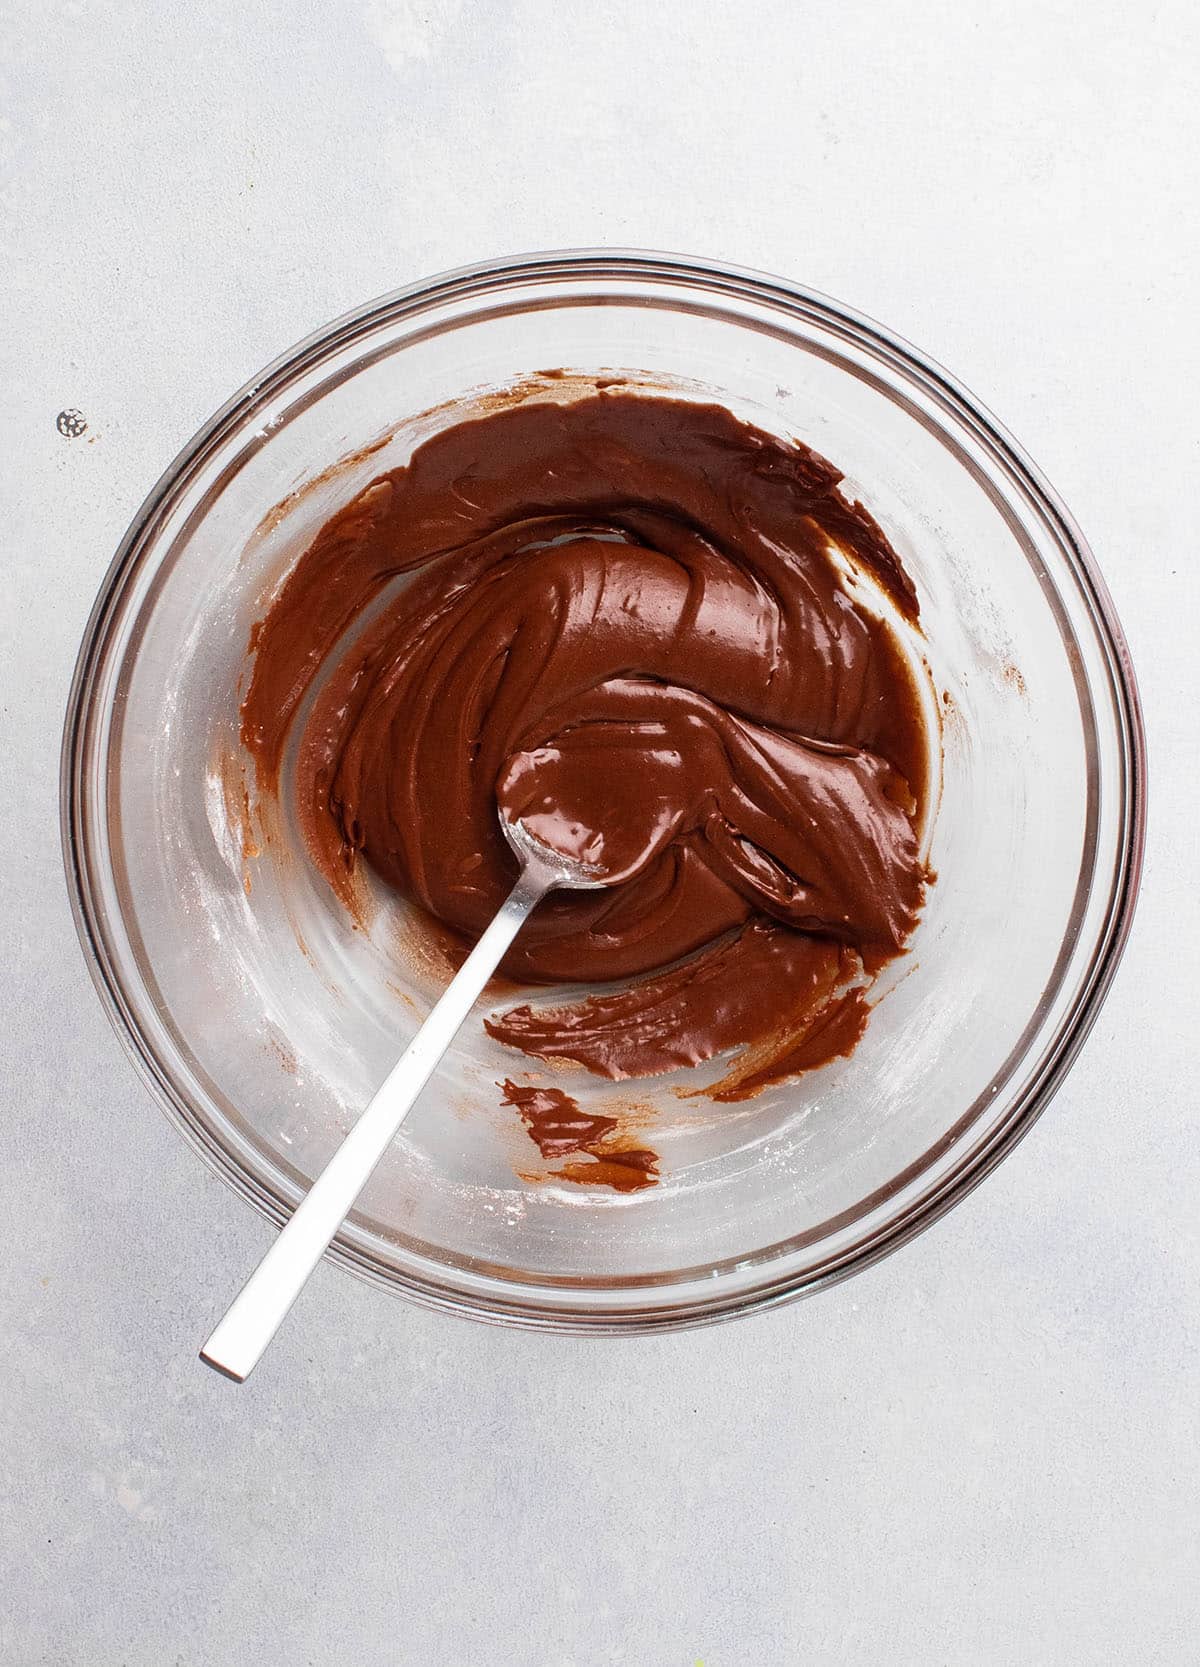 Chocolate fudge frosting in a glass mixing bowl.